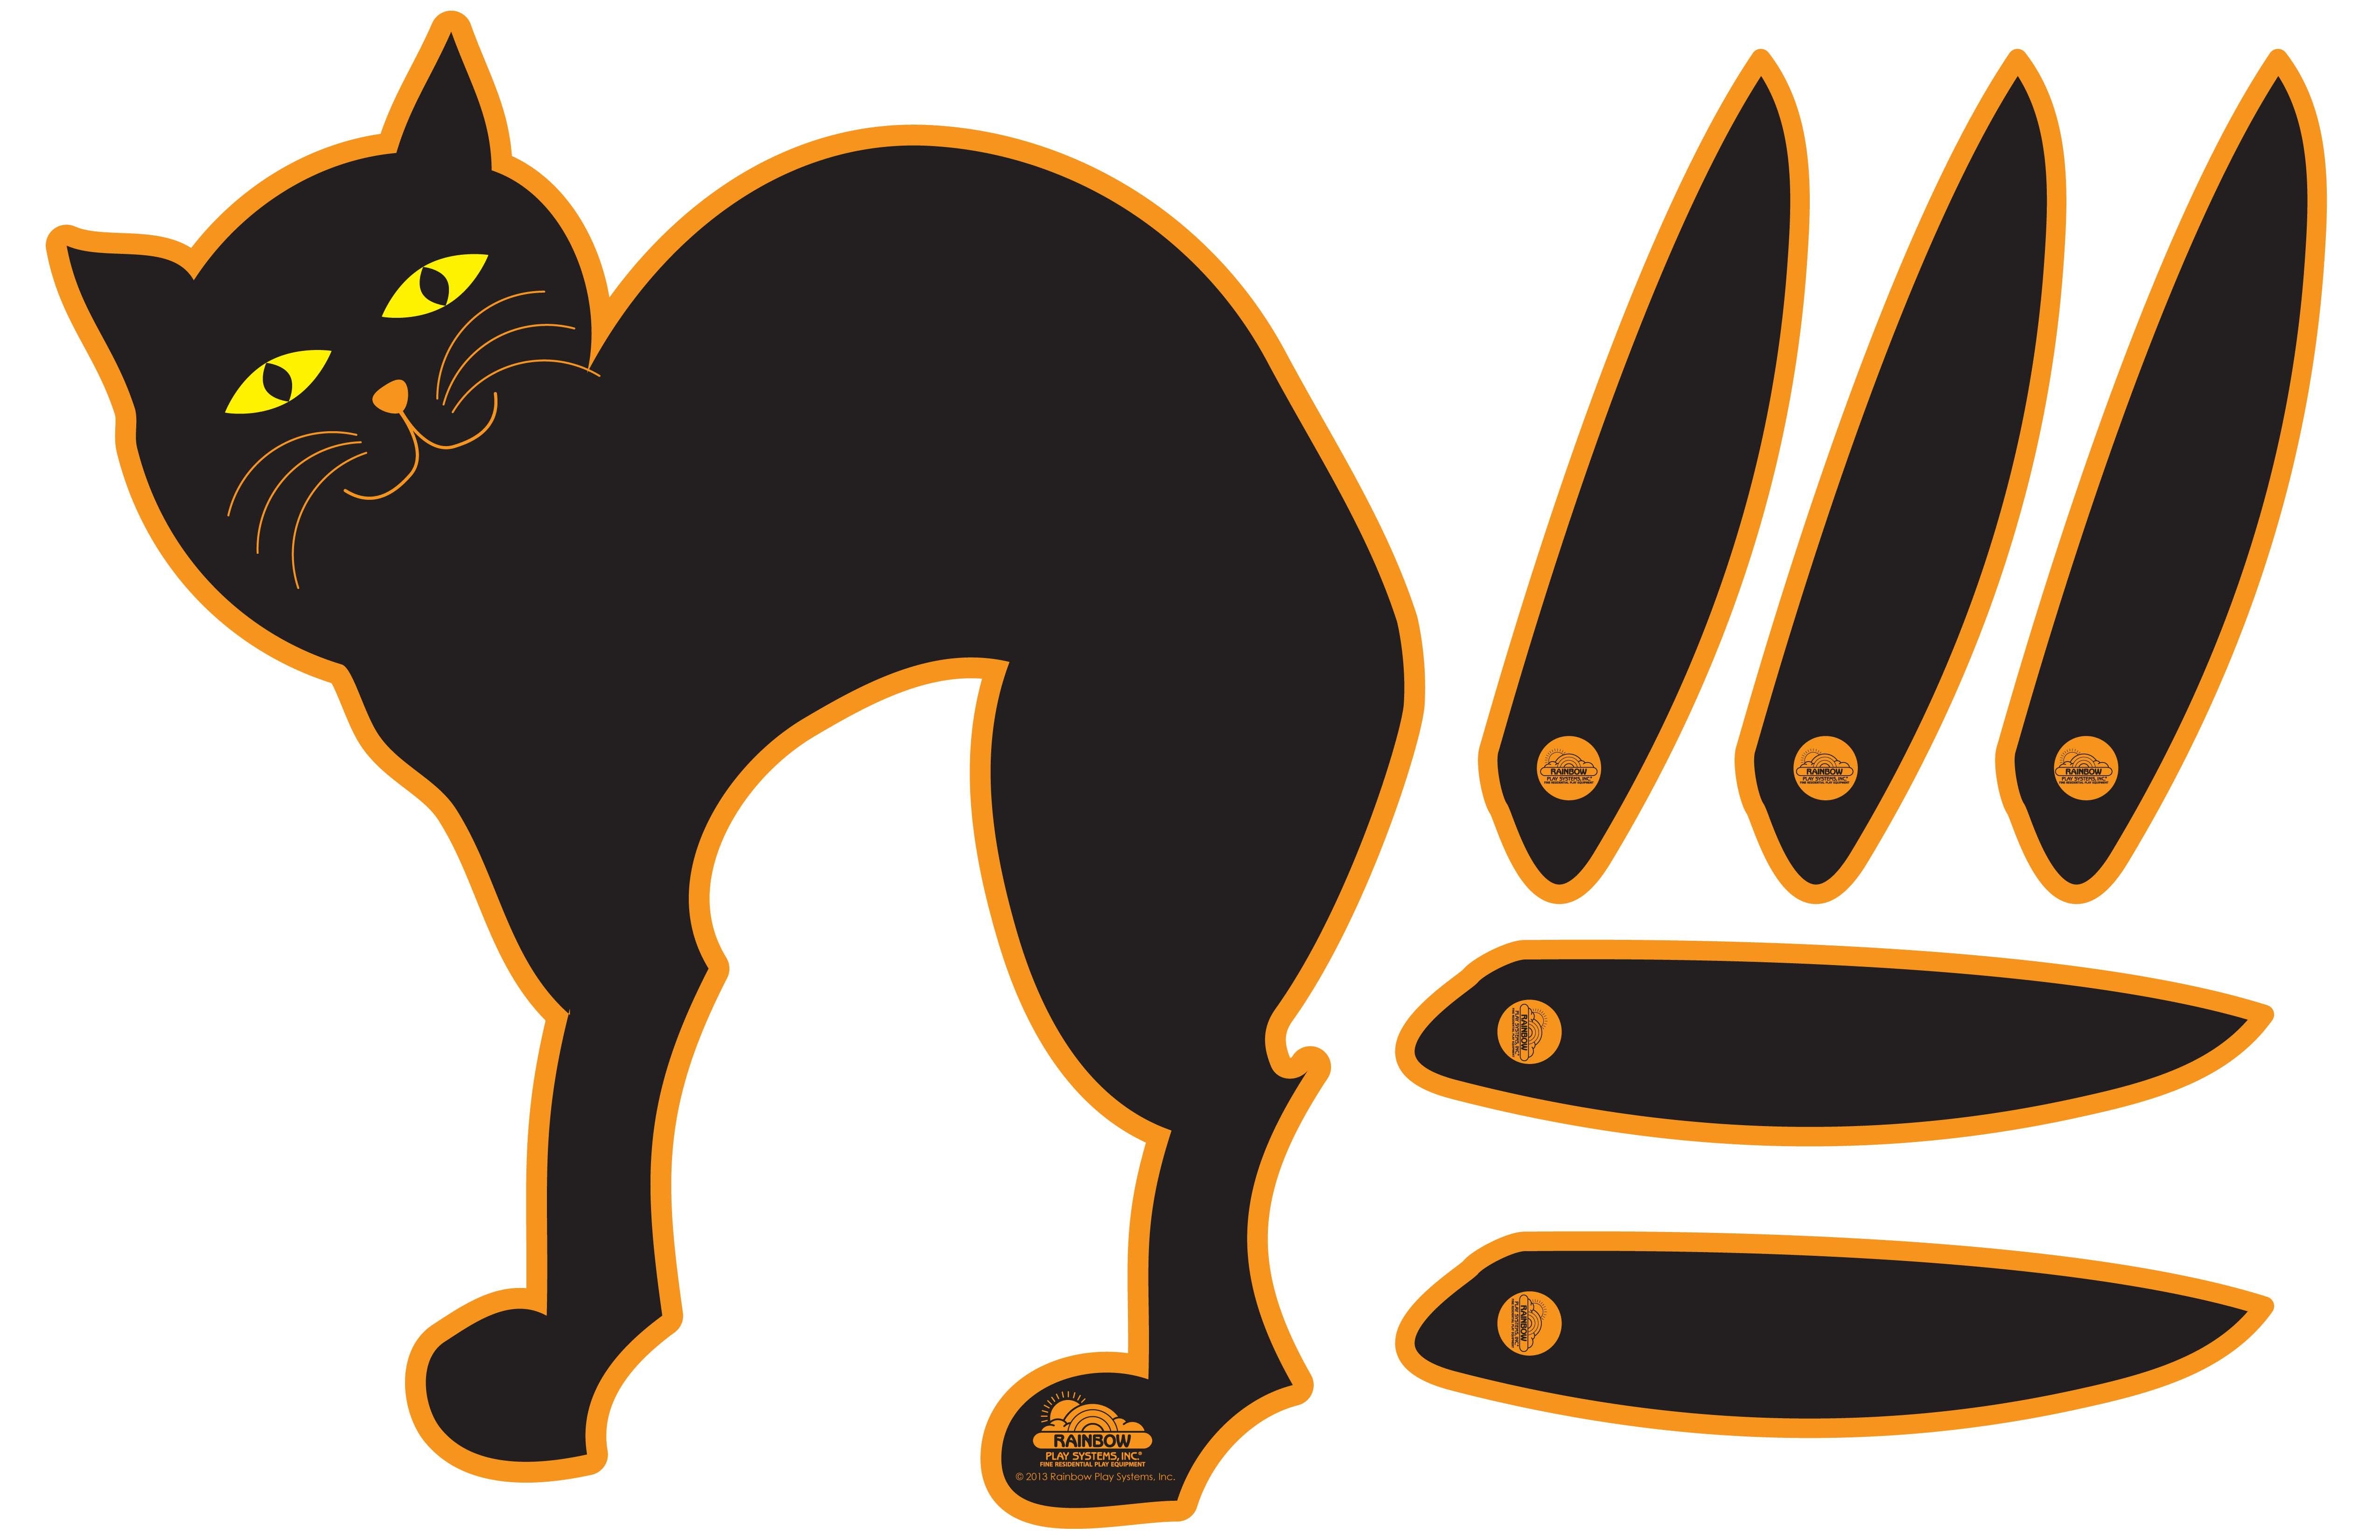 Pin The Tail On The Cat | Kids Holiday - Halloween Activities | Fun - Free Printable Pin The Tail On The Cat